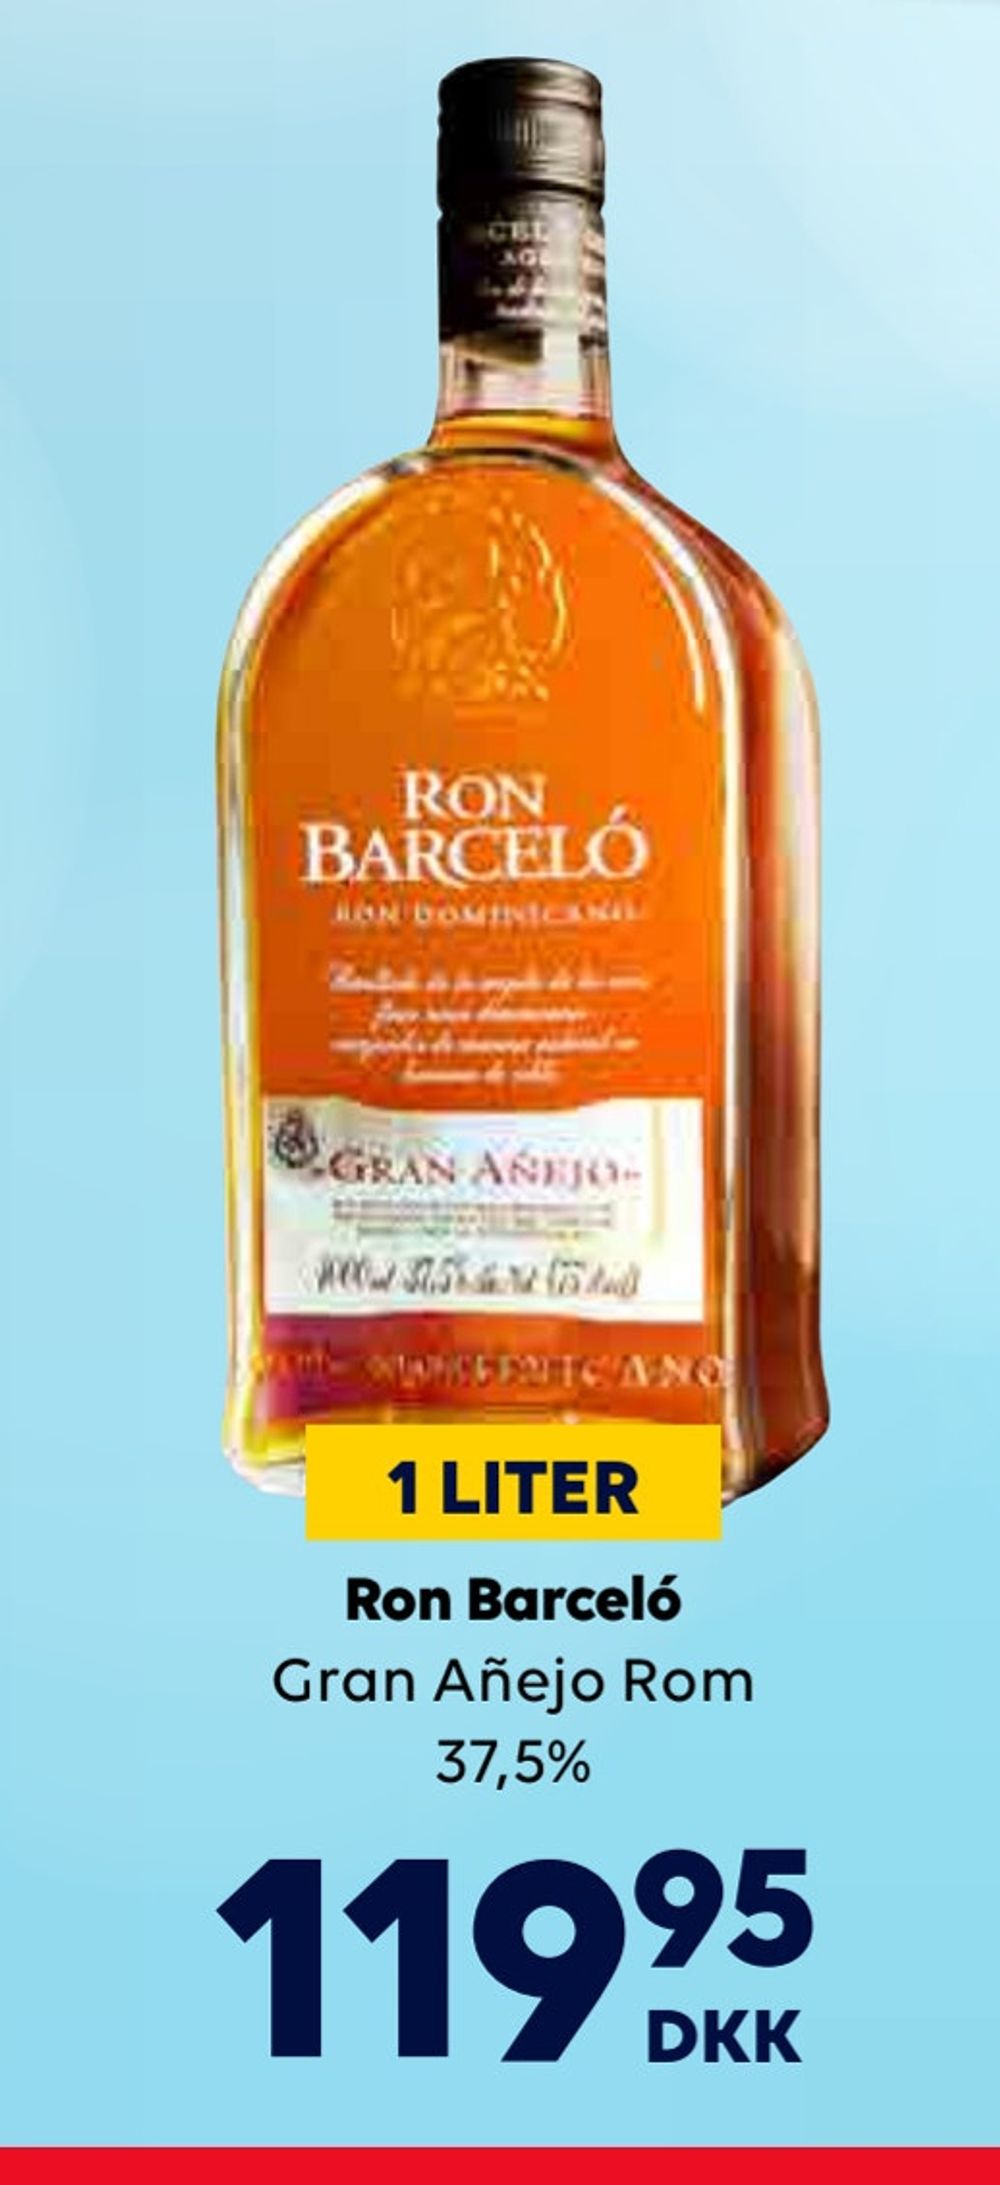 Deals on Ron Barceló from BorderShop at 119,95 kr.